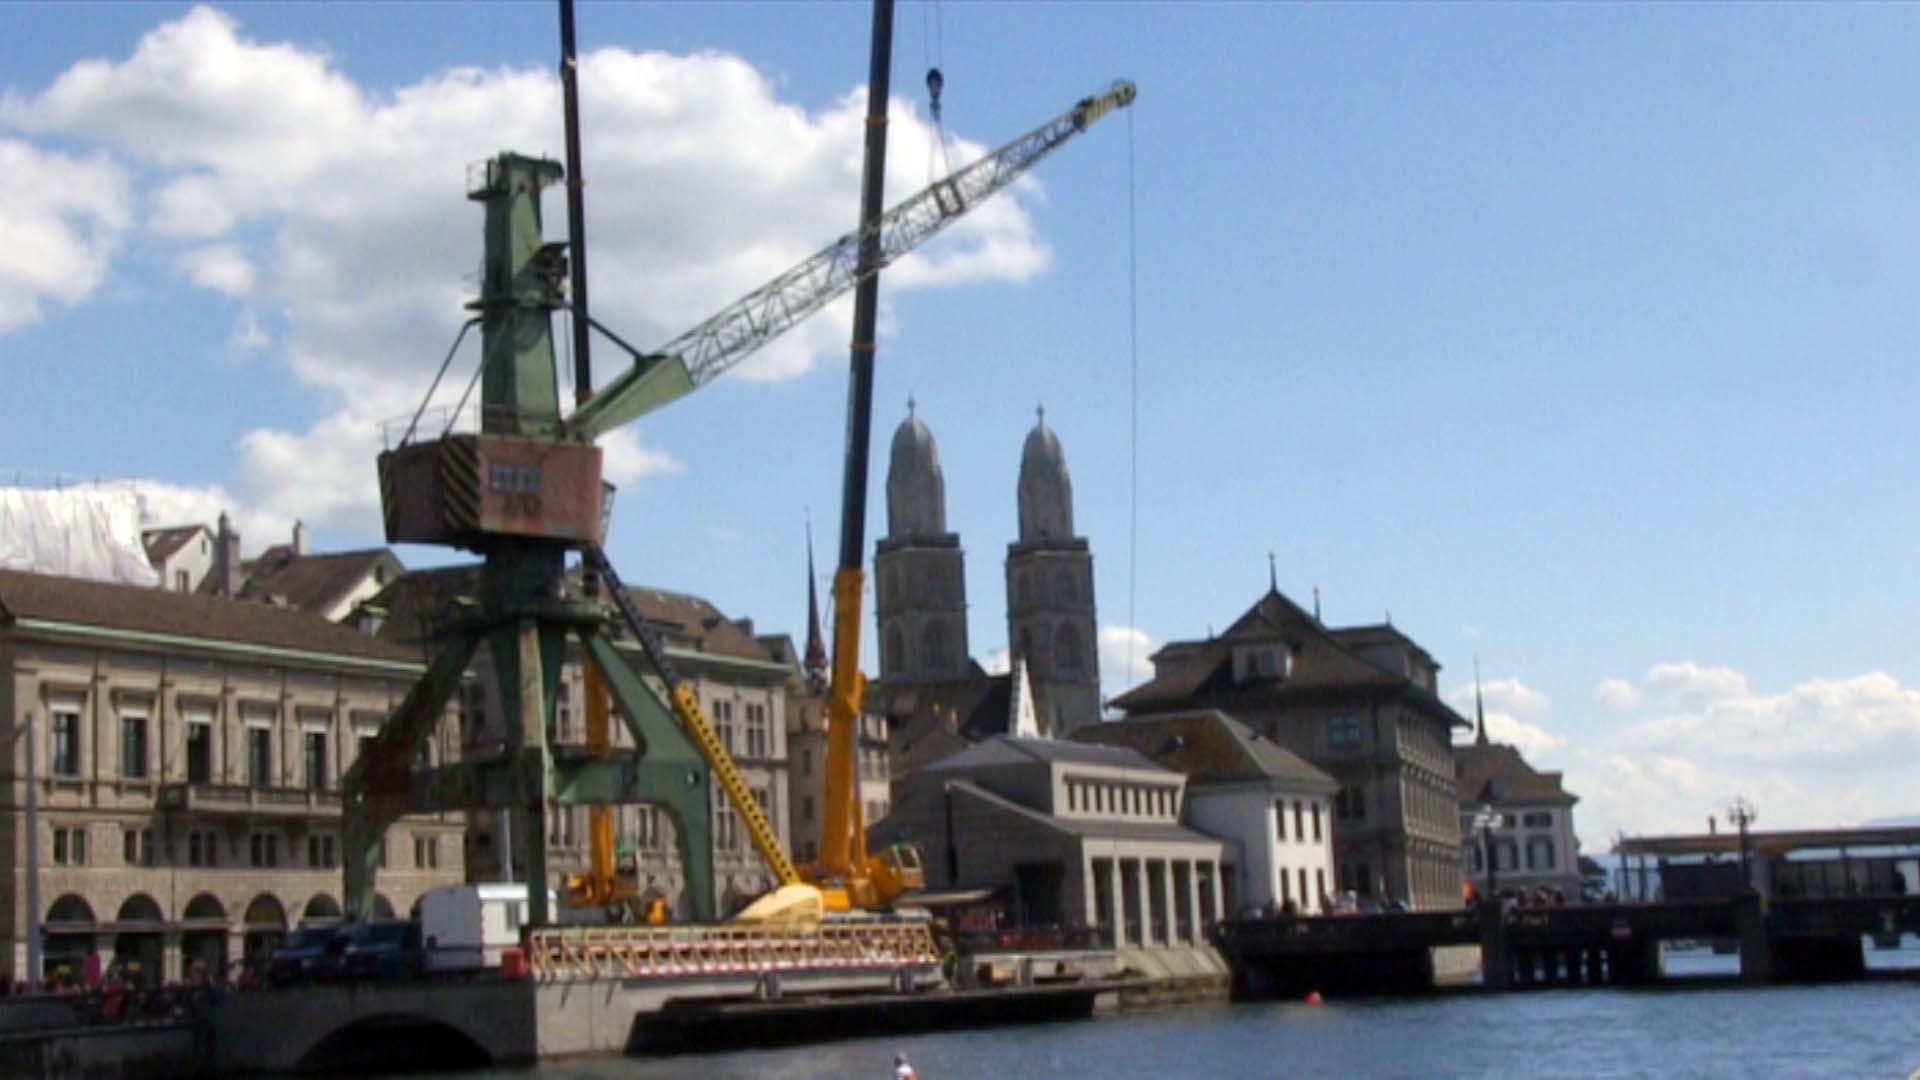 The harbour crane on the side of a river in Zurich